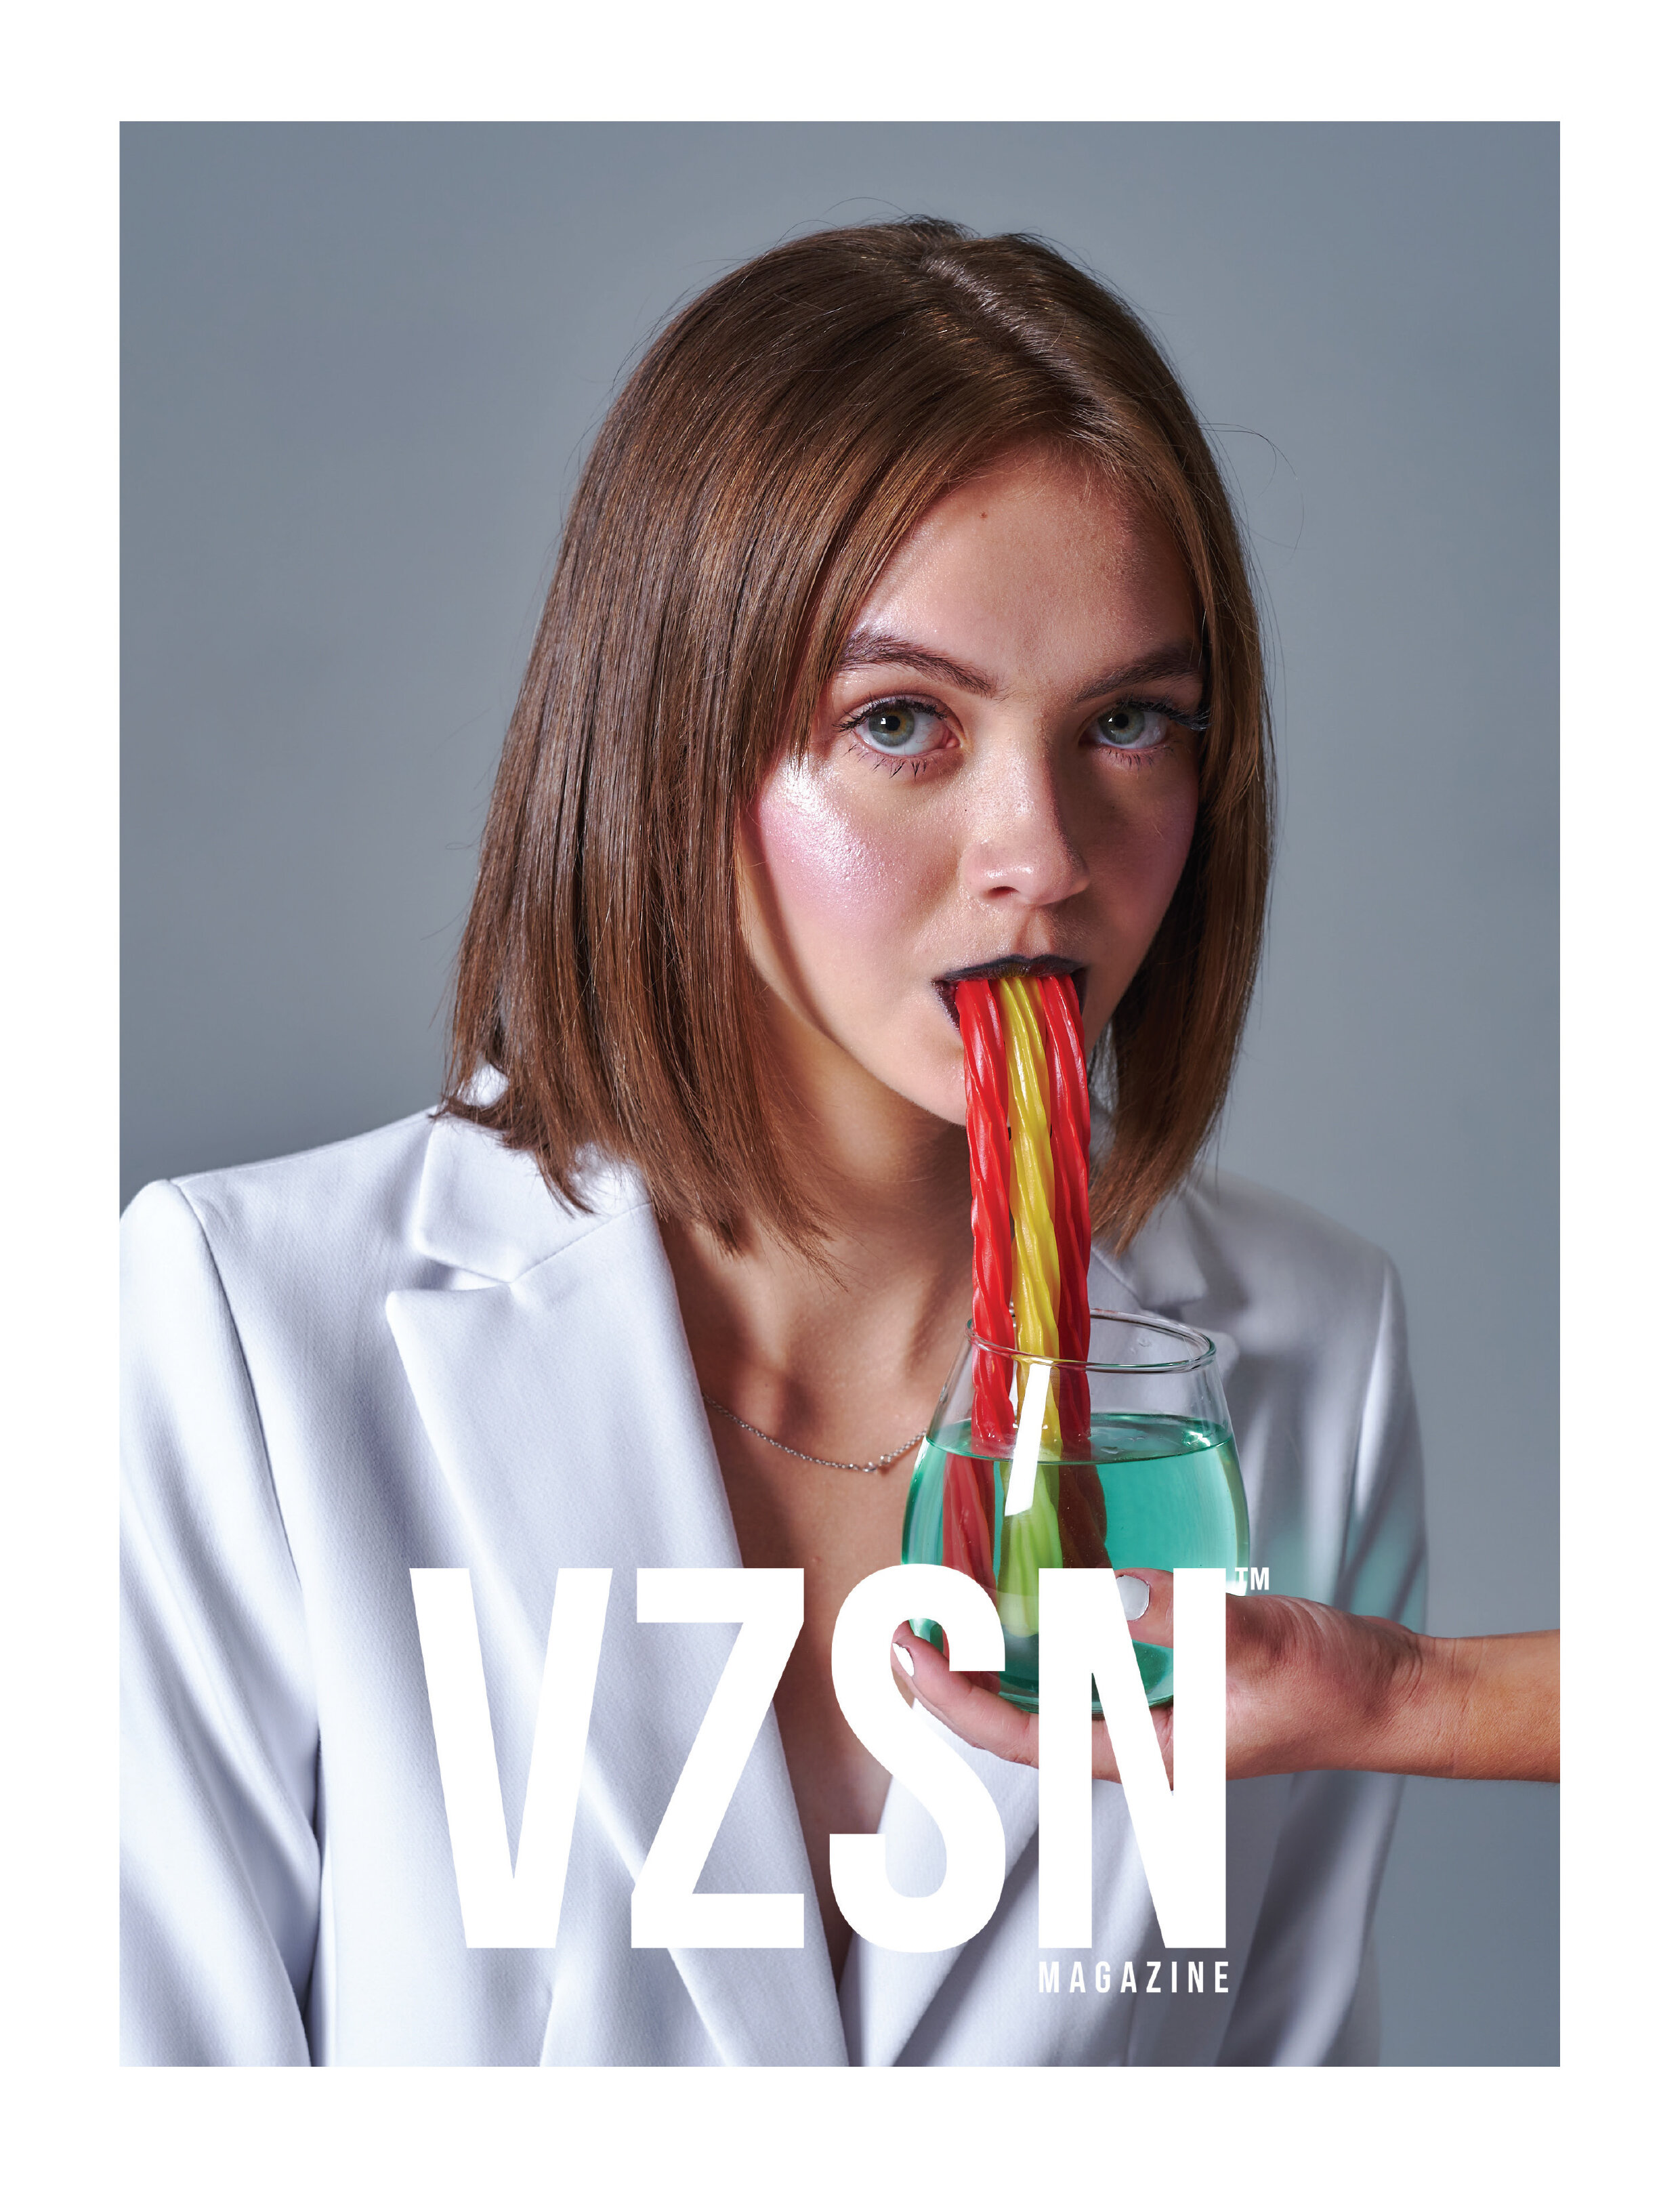 VZSN tearsheets and cover-8.jpg